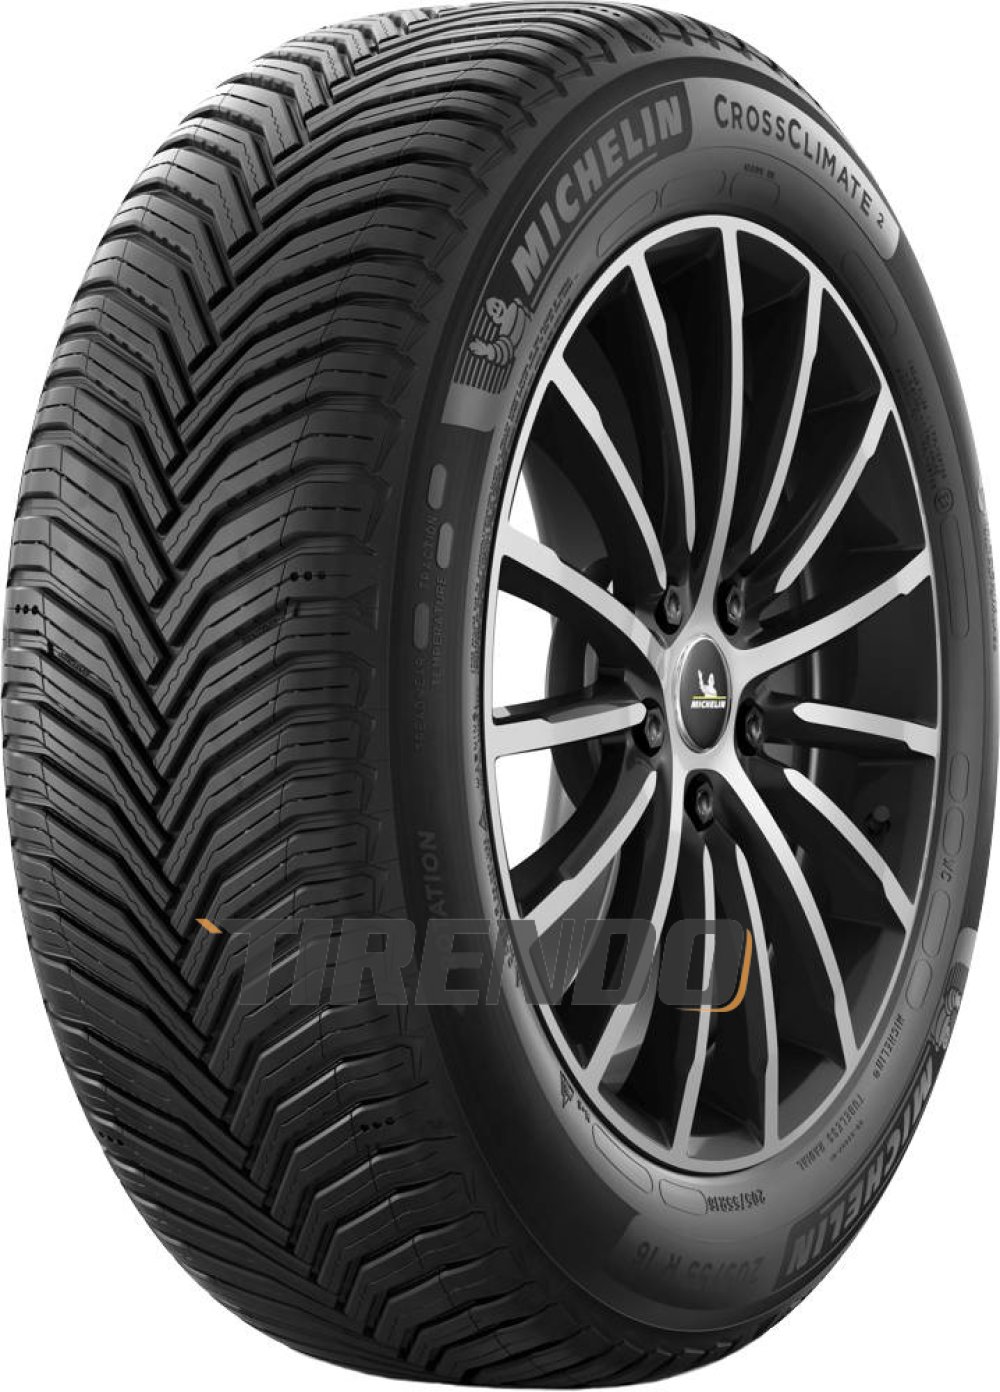 Image of Michelin CrossClimate 2 ( 255/35 R20 97Y XL )